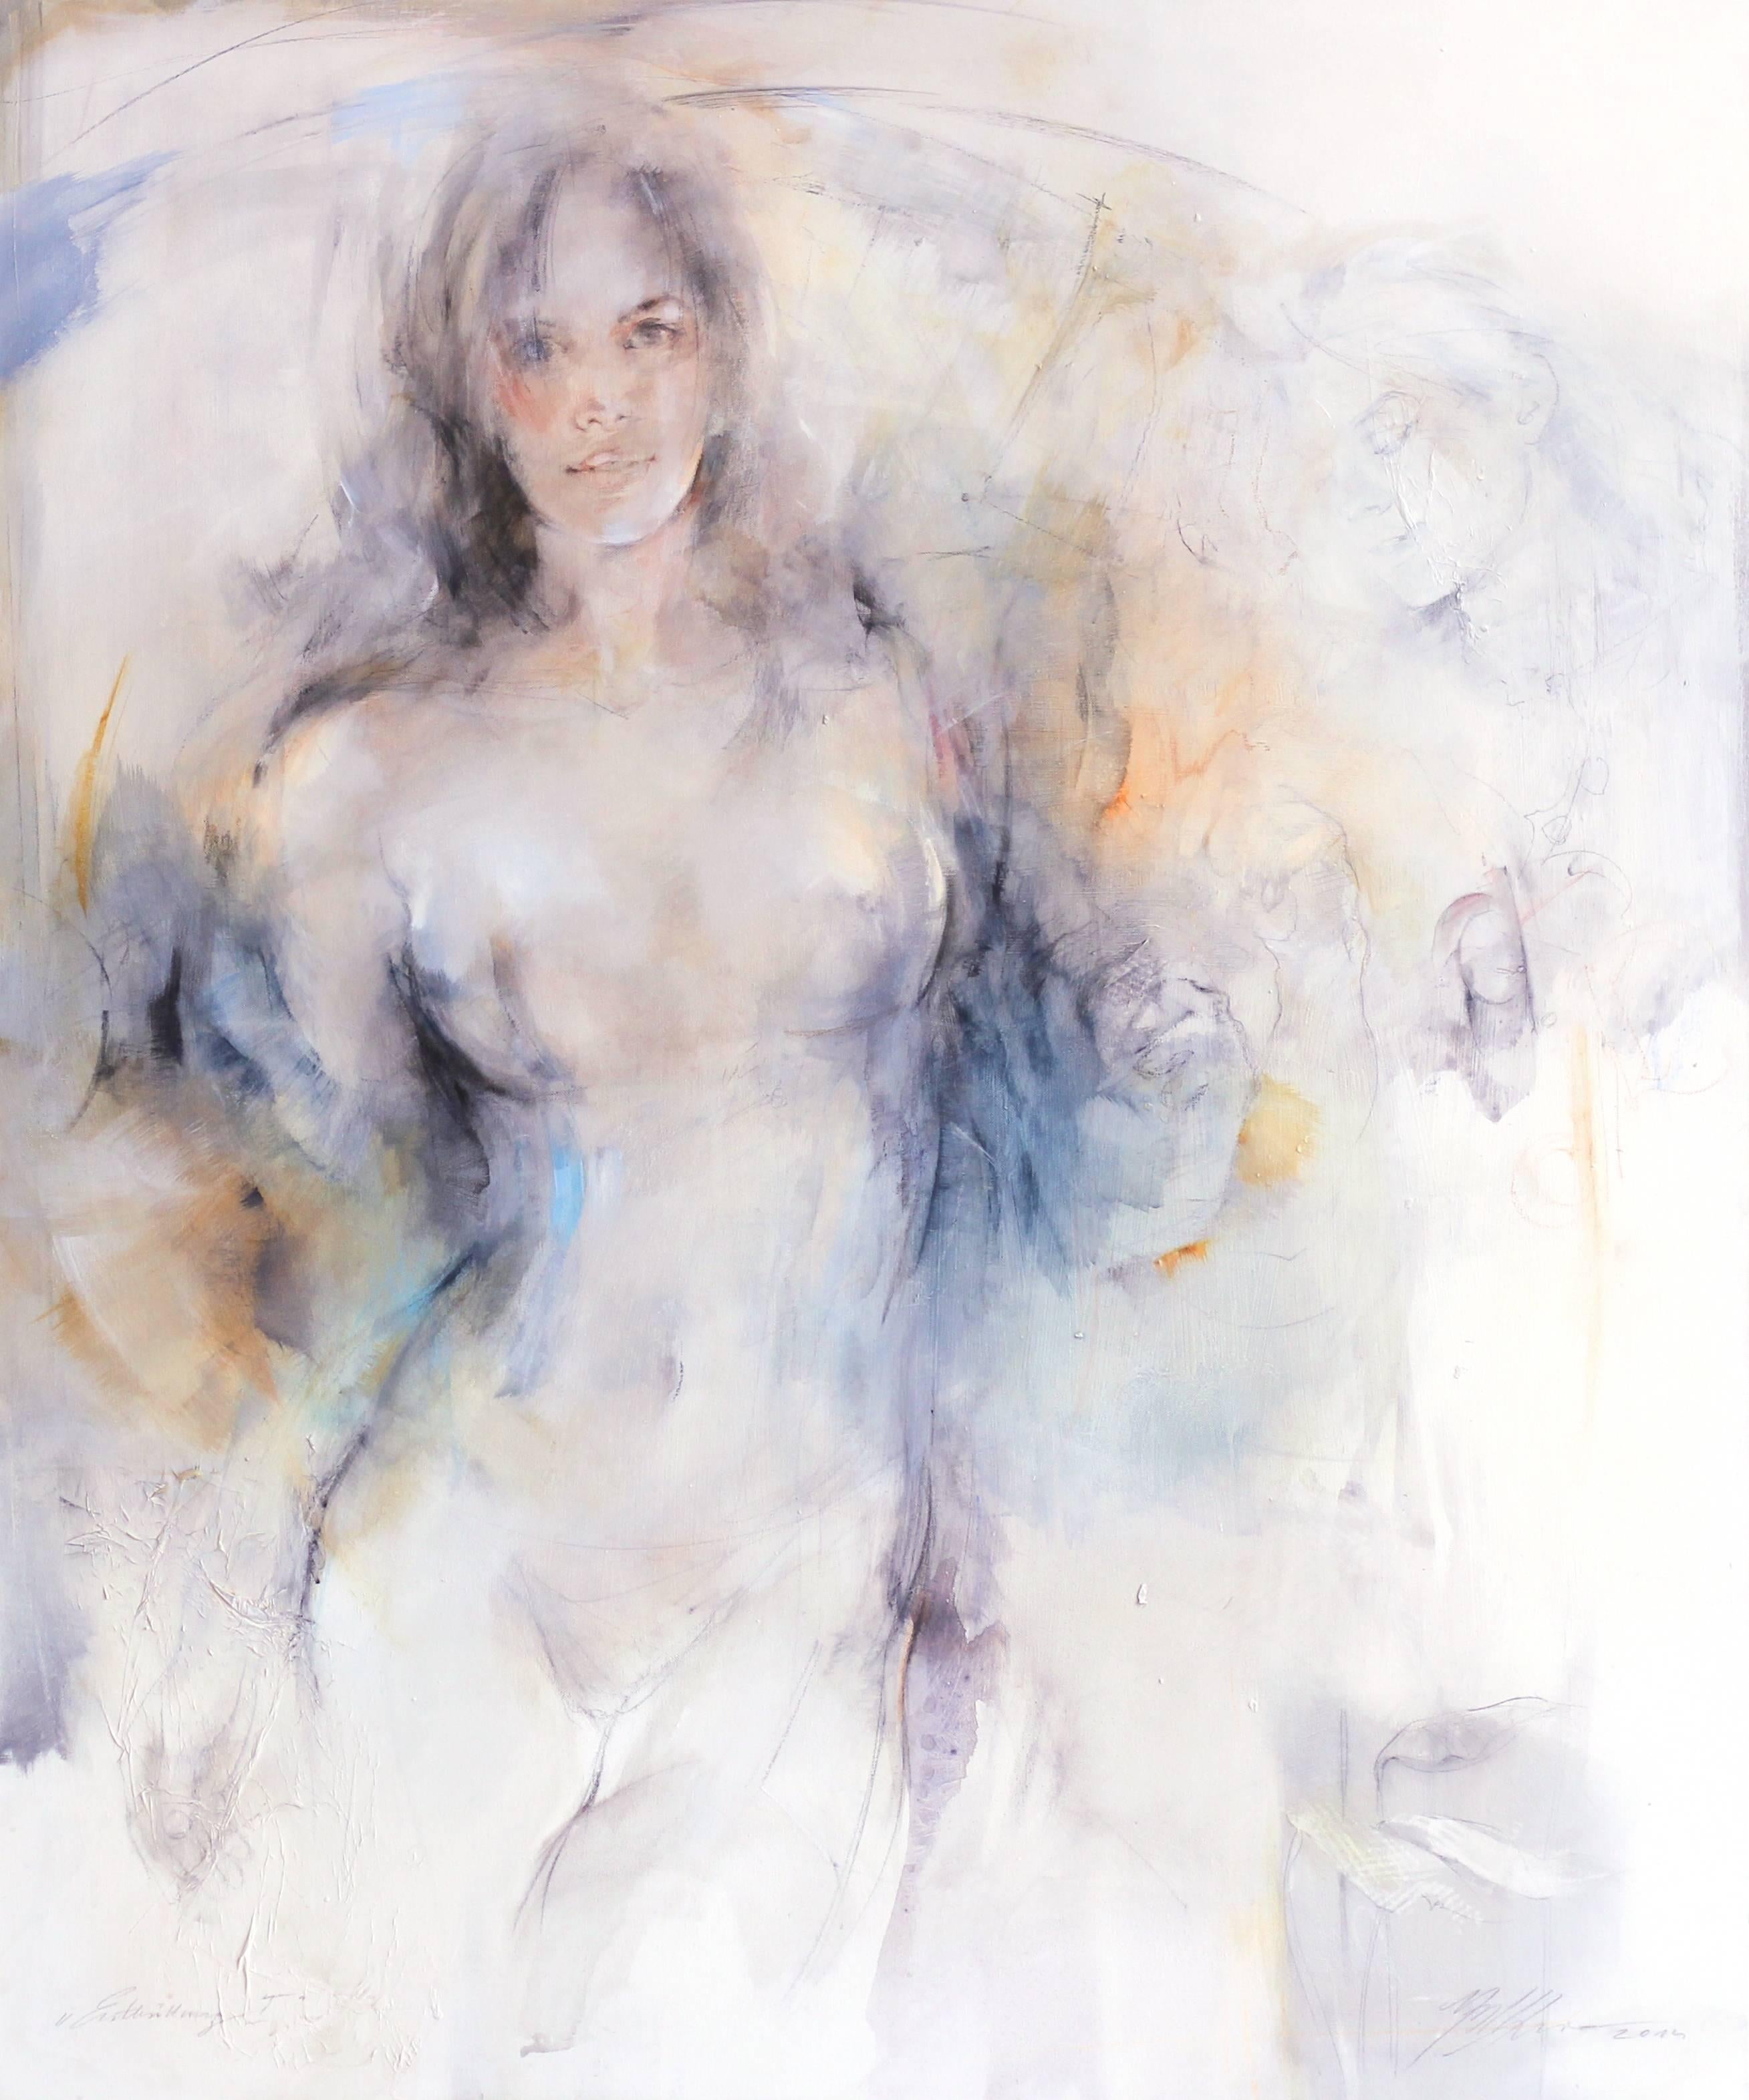 Courage - Soft Toned Sensitive Portrayal of Intimate Figures and Graceful Nudes - Mixed Media Art by Gabriele Mierzwa